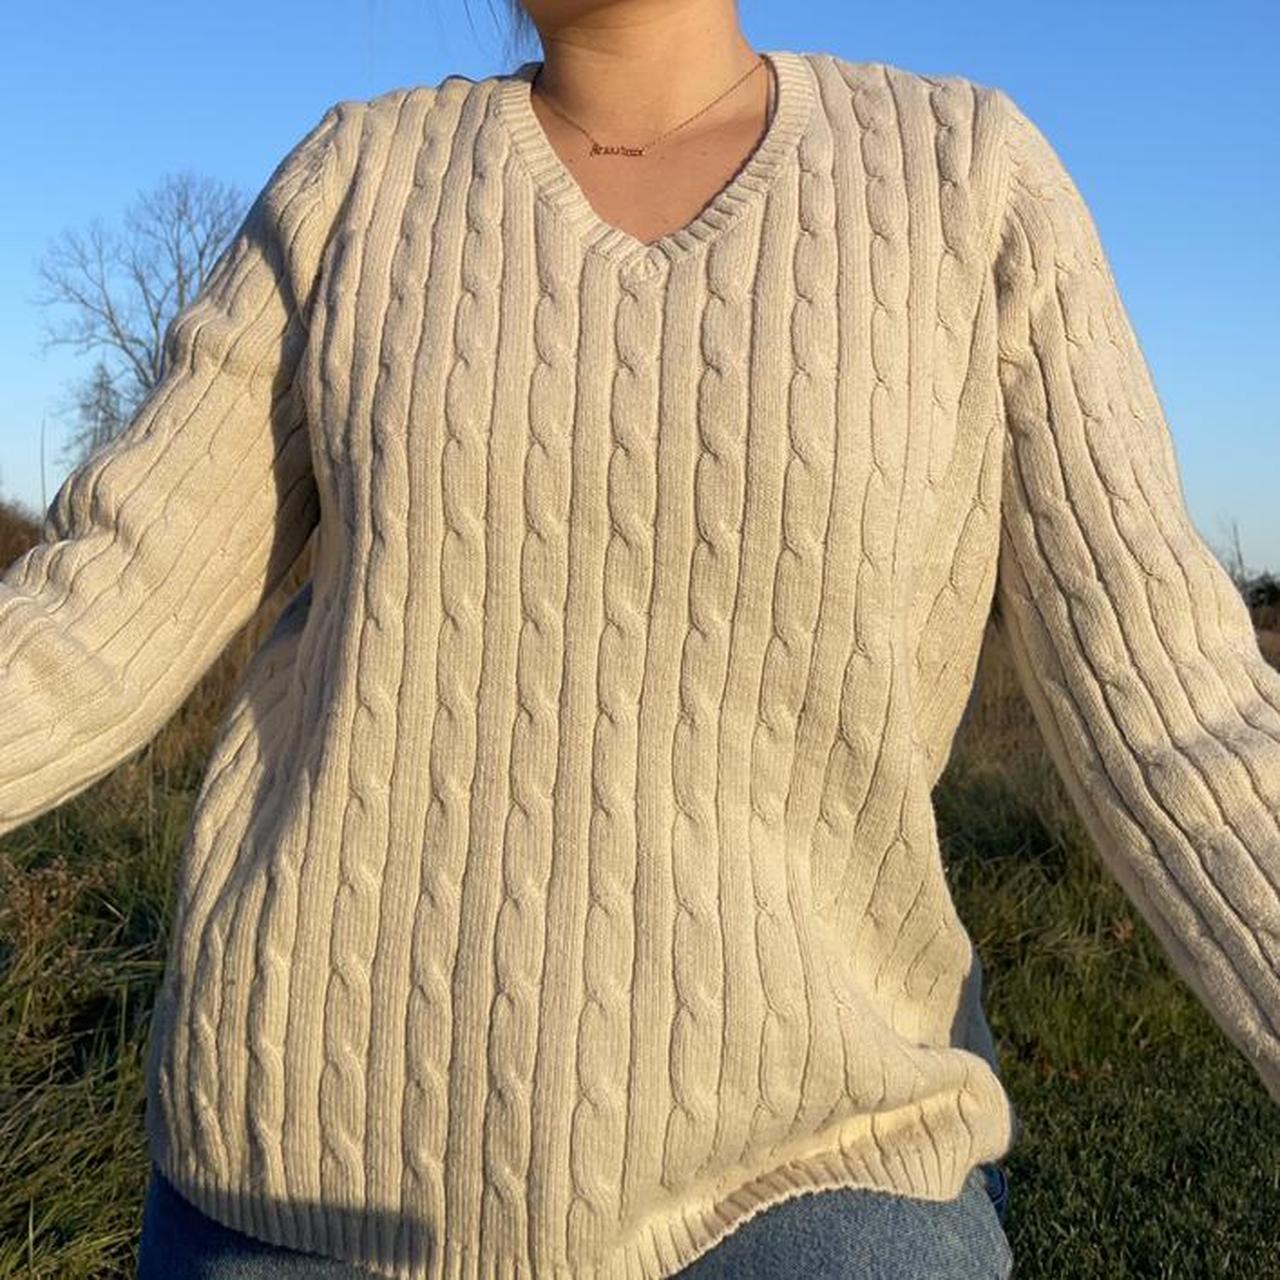 Product Image 3 - cable knit v-neck sweater

tan/beige color
brand: